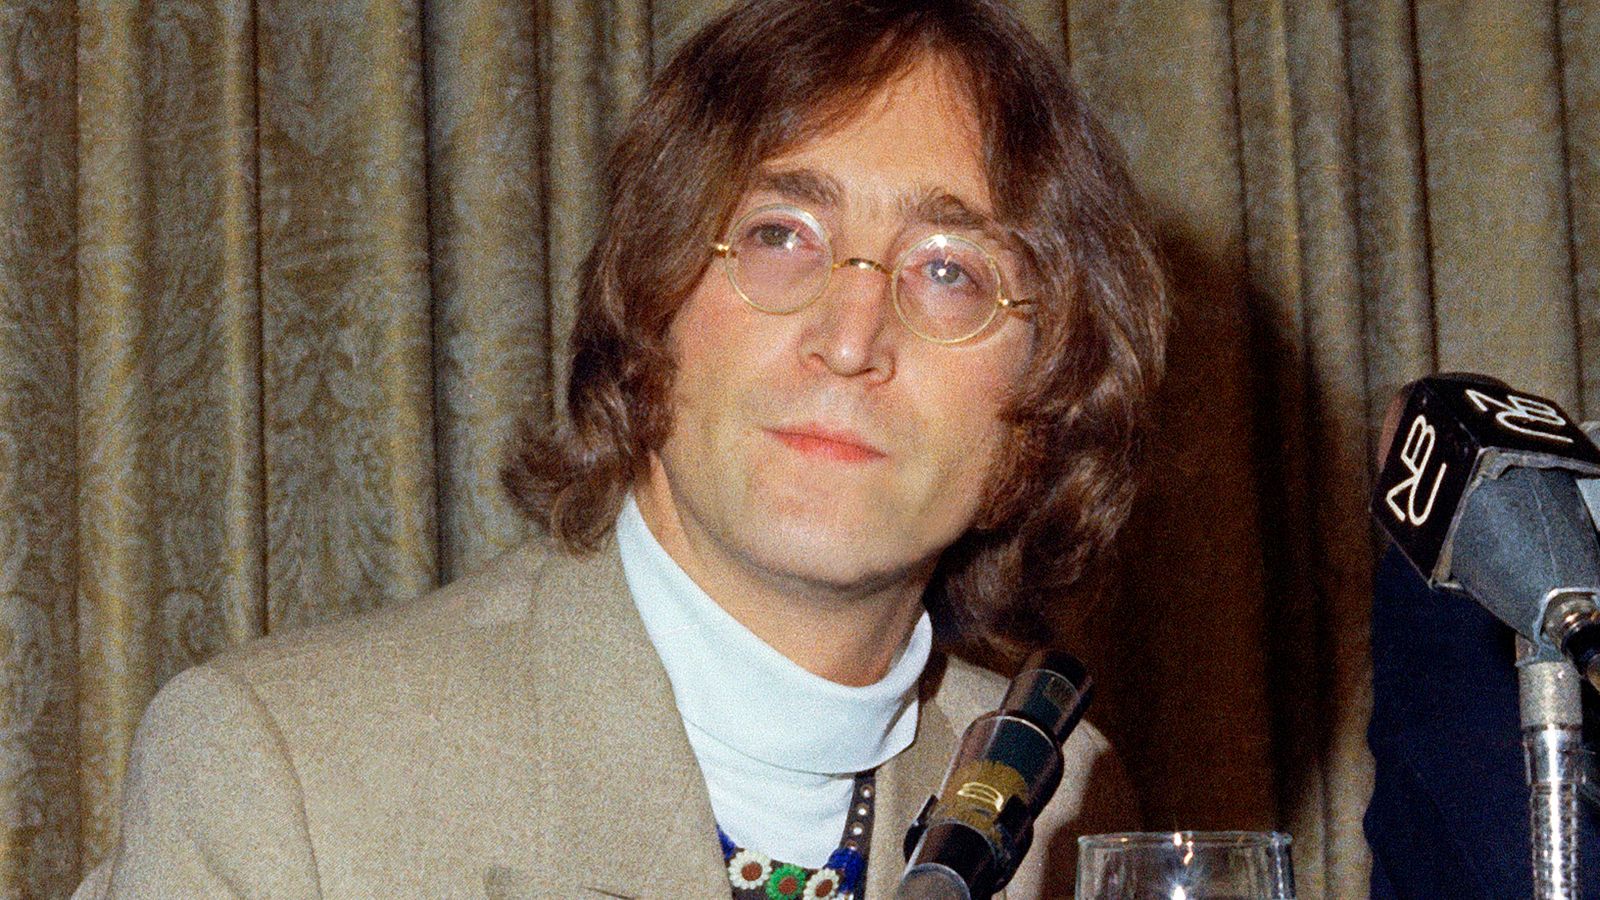 lawyer who became hero among beatles fans for fighting john lennon's deportation has died